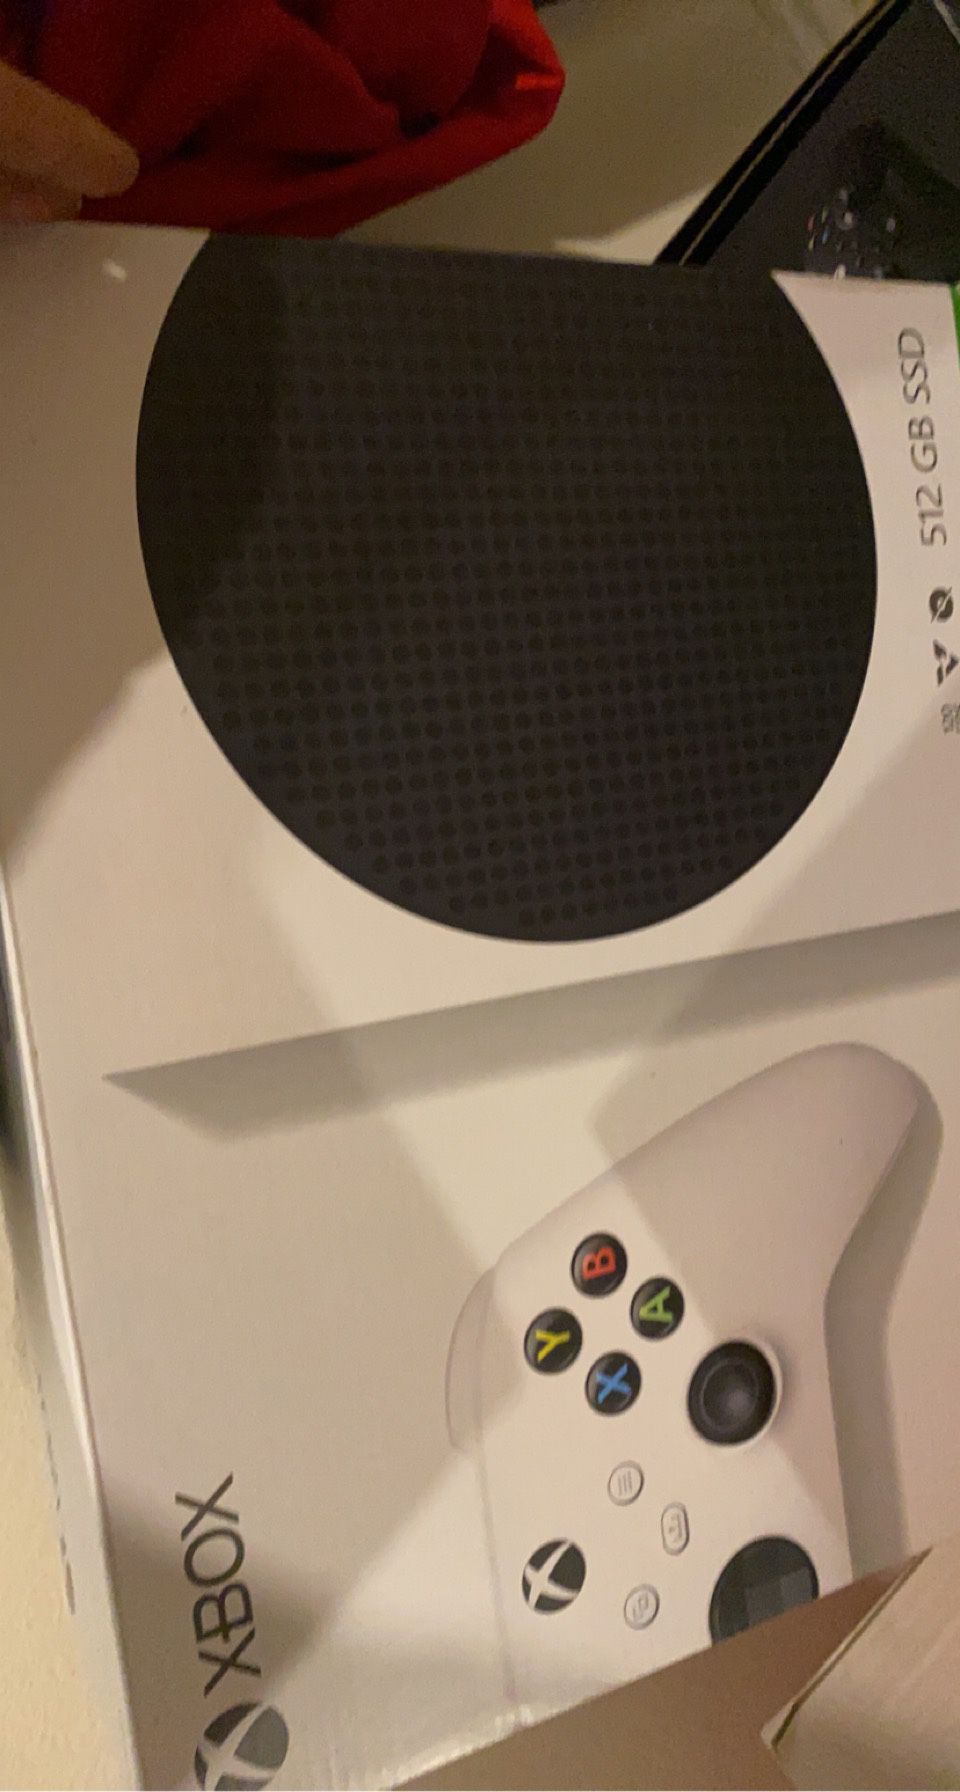 Next Gen Xbox Series S. (Comes With Box)